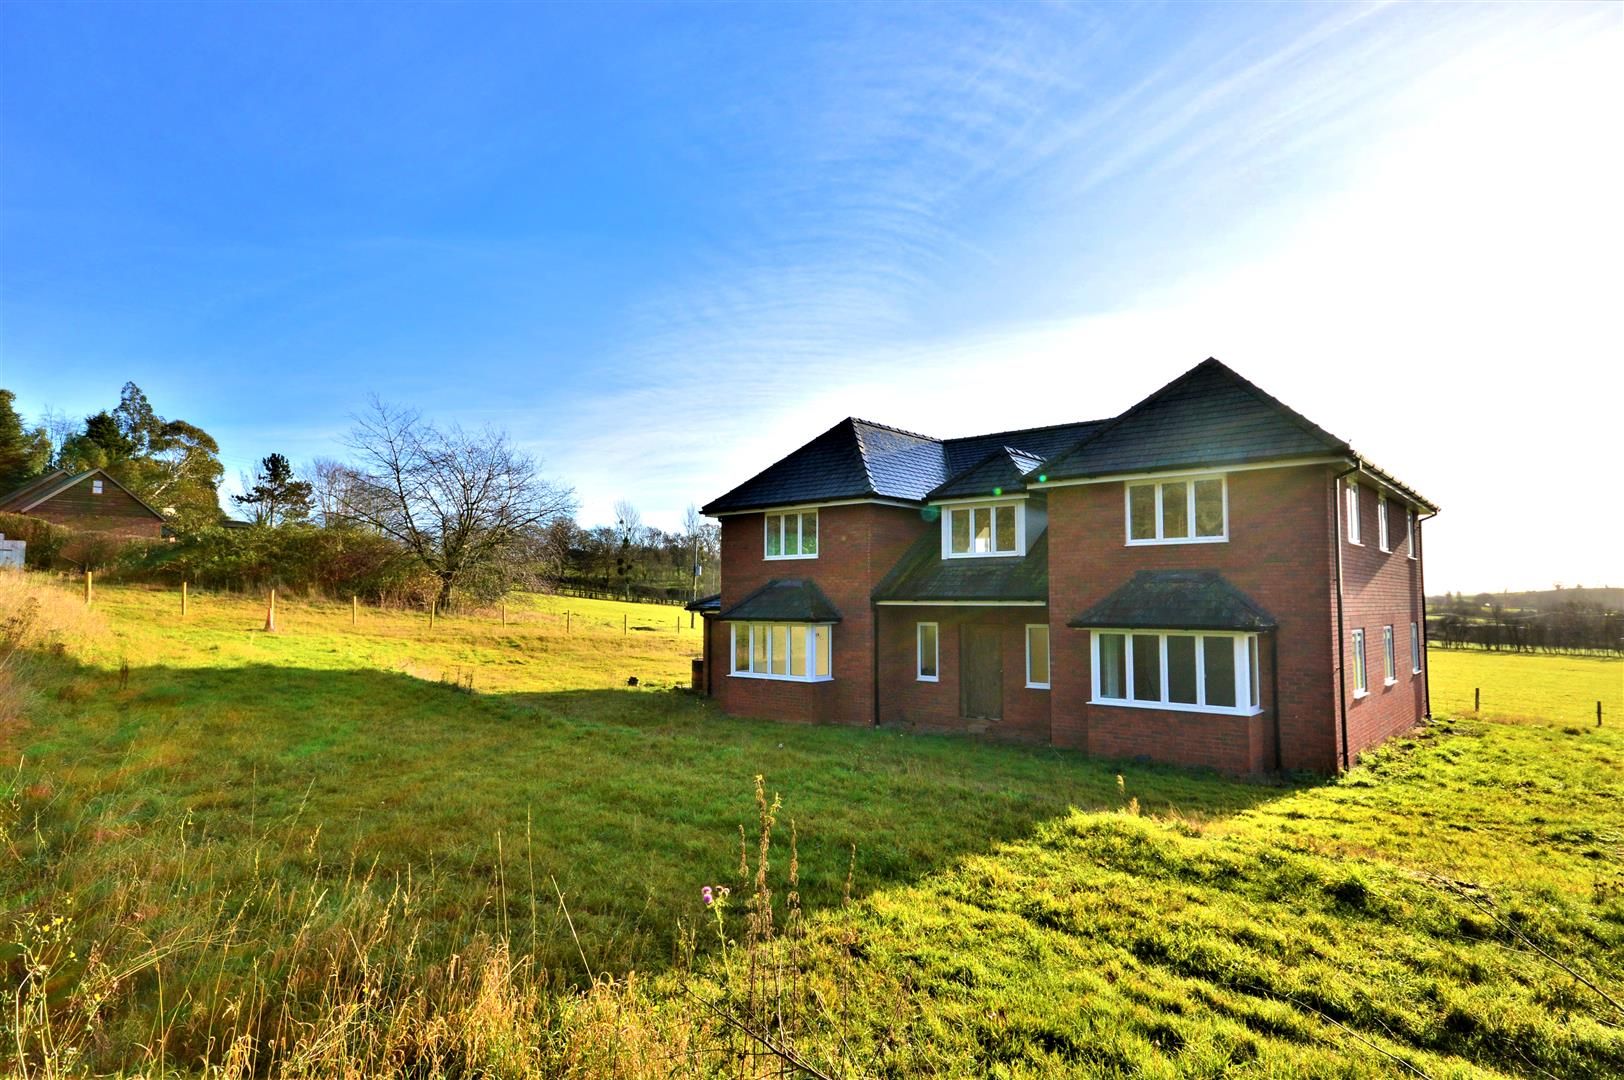 4 bed detached for sale in Marden, HR1